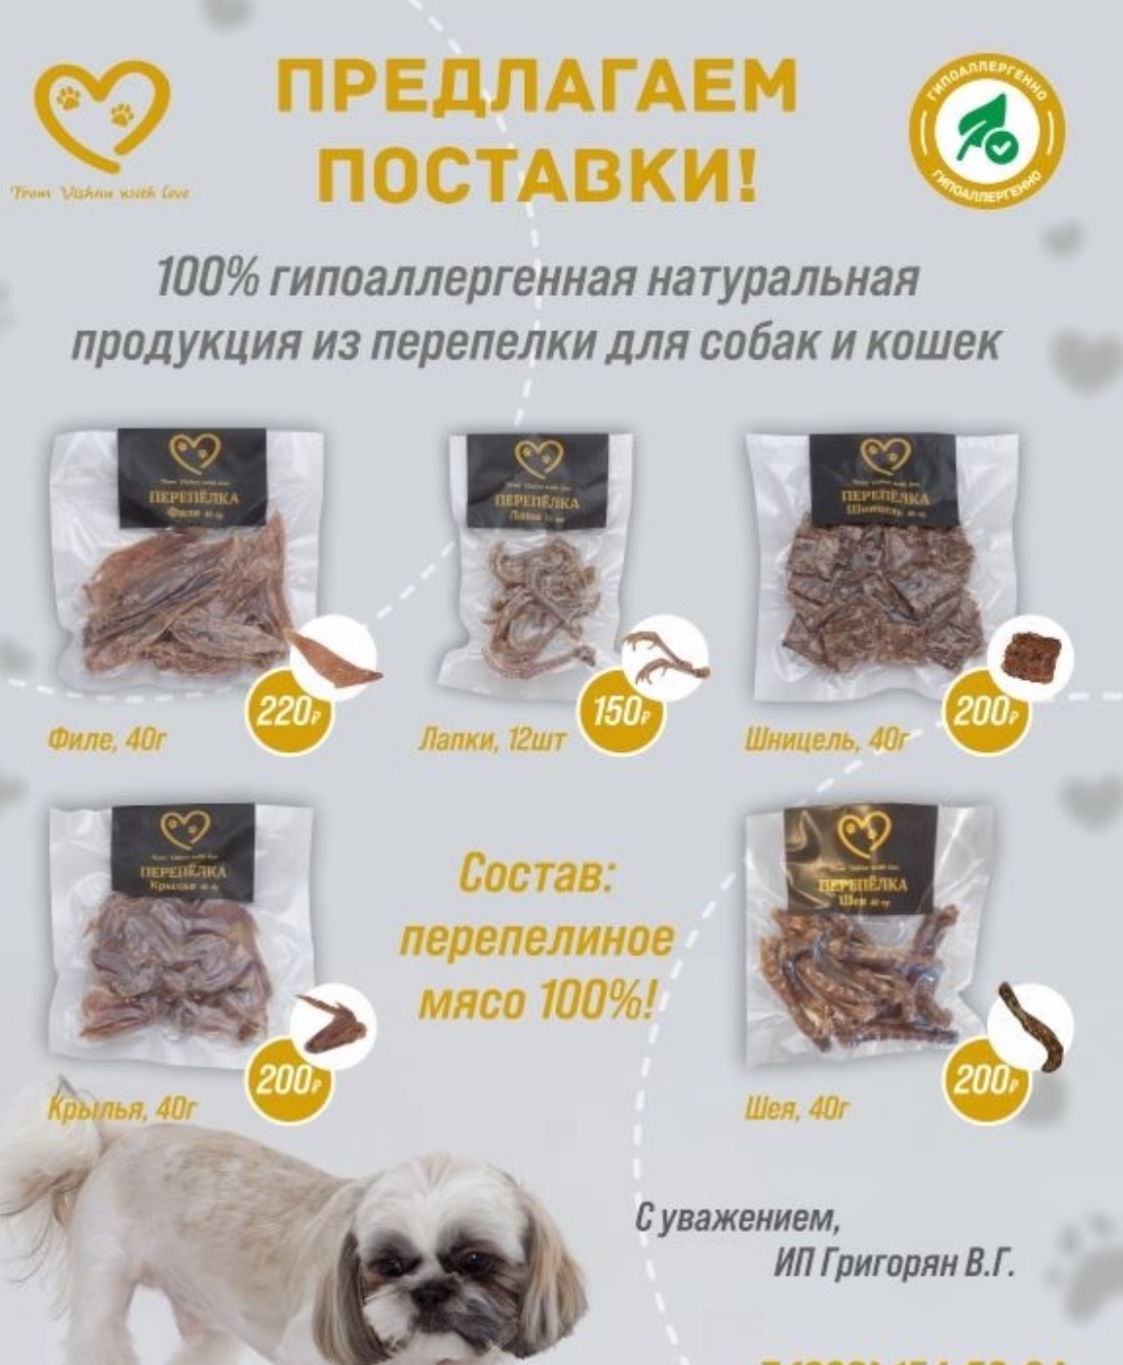 Production of pet bags made of quail meat